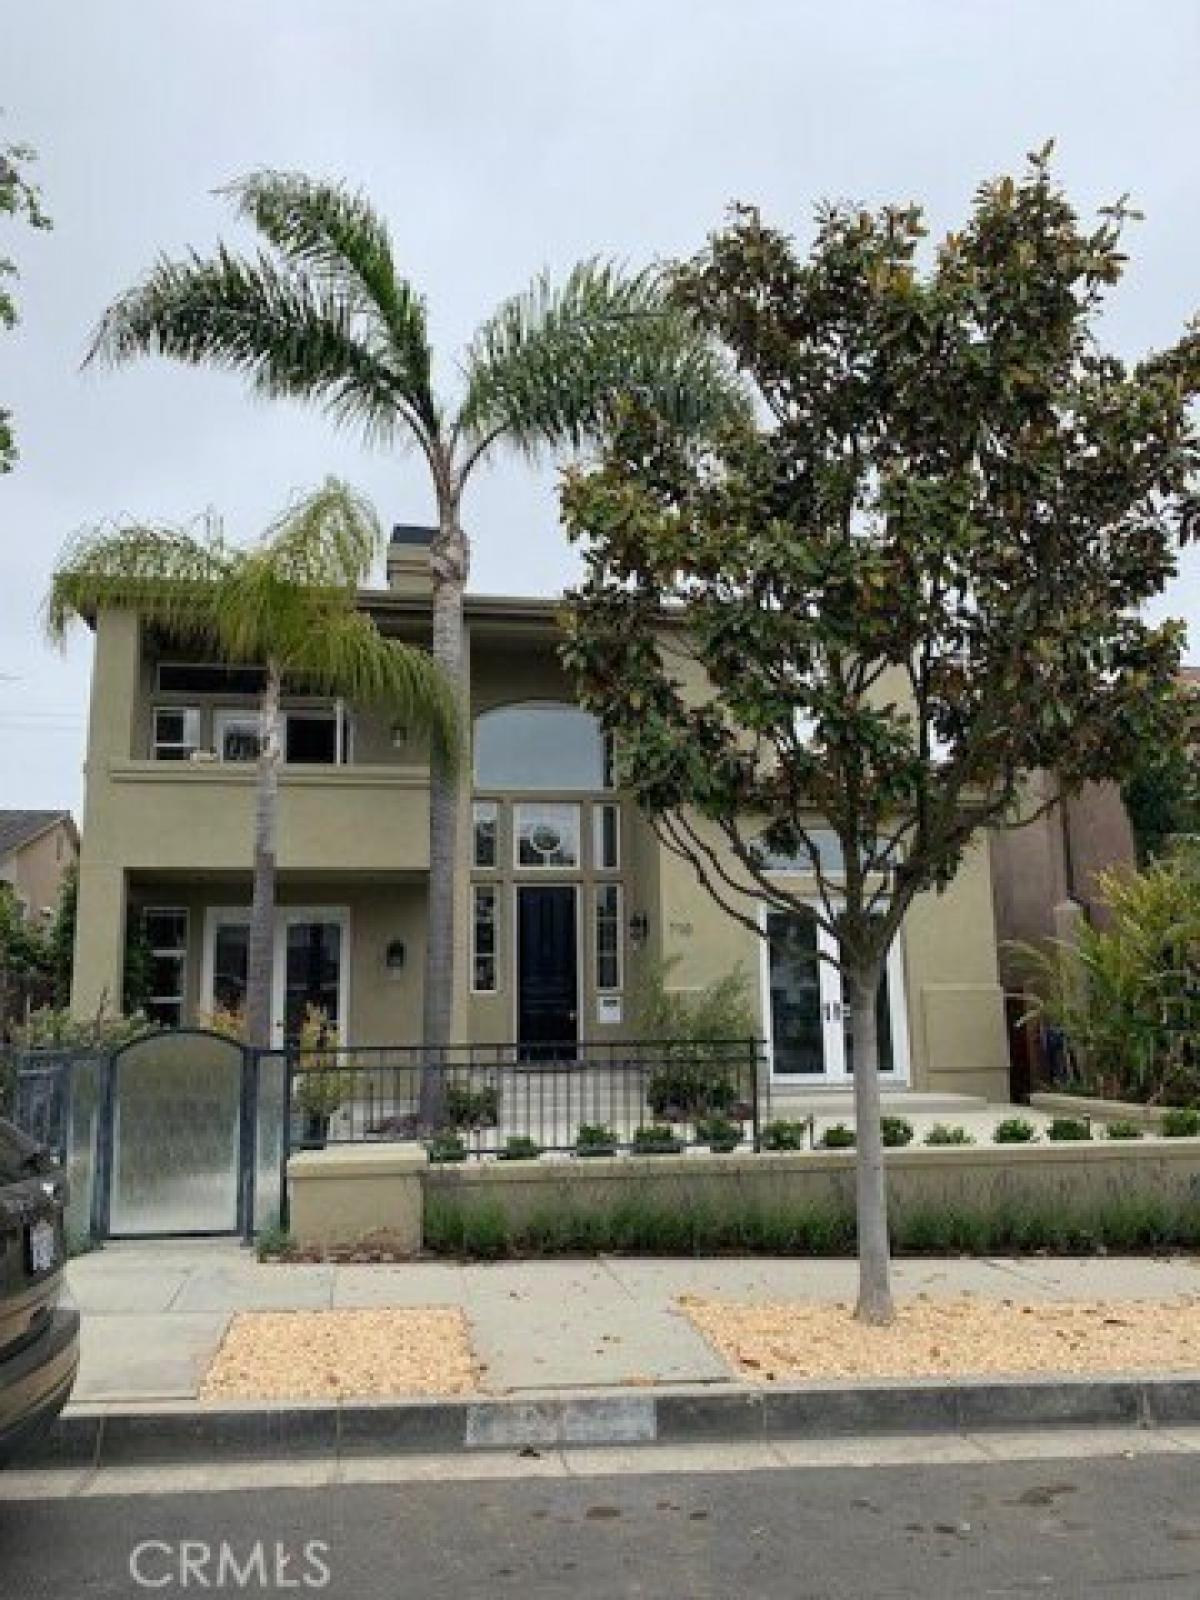 Picture of Home For Rent in Corona del Mar, California, United States